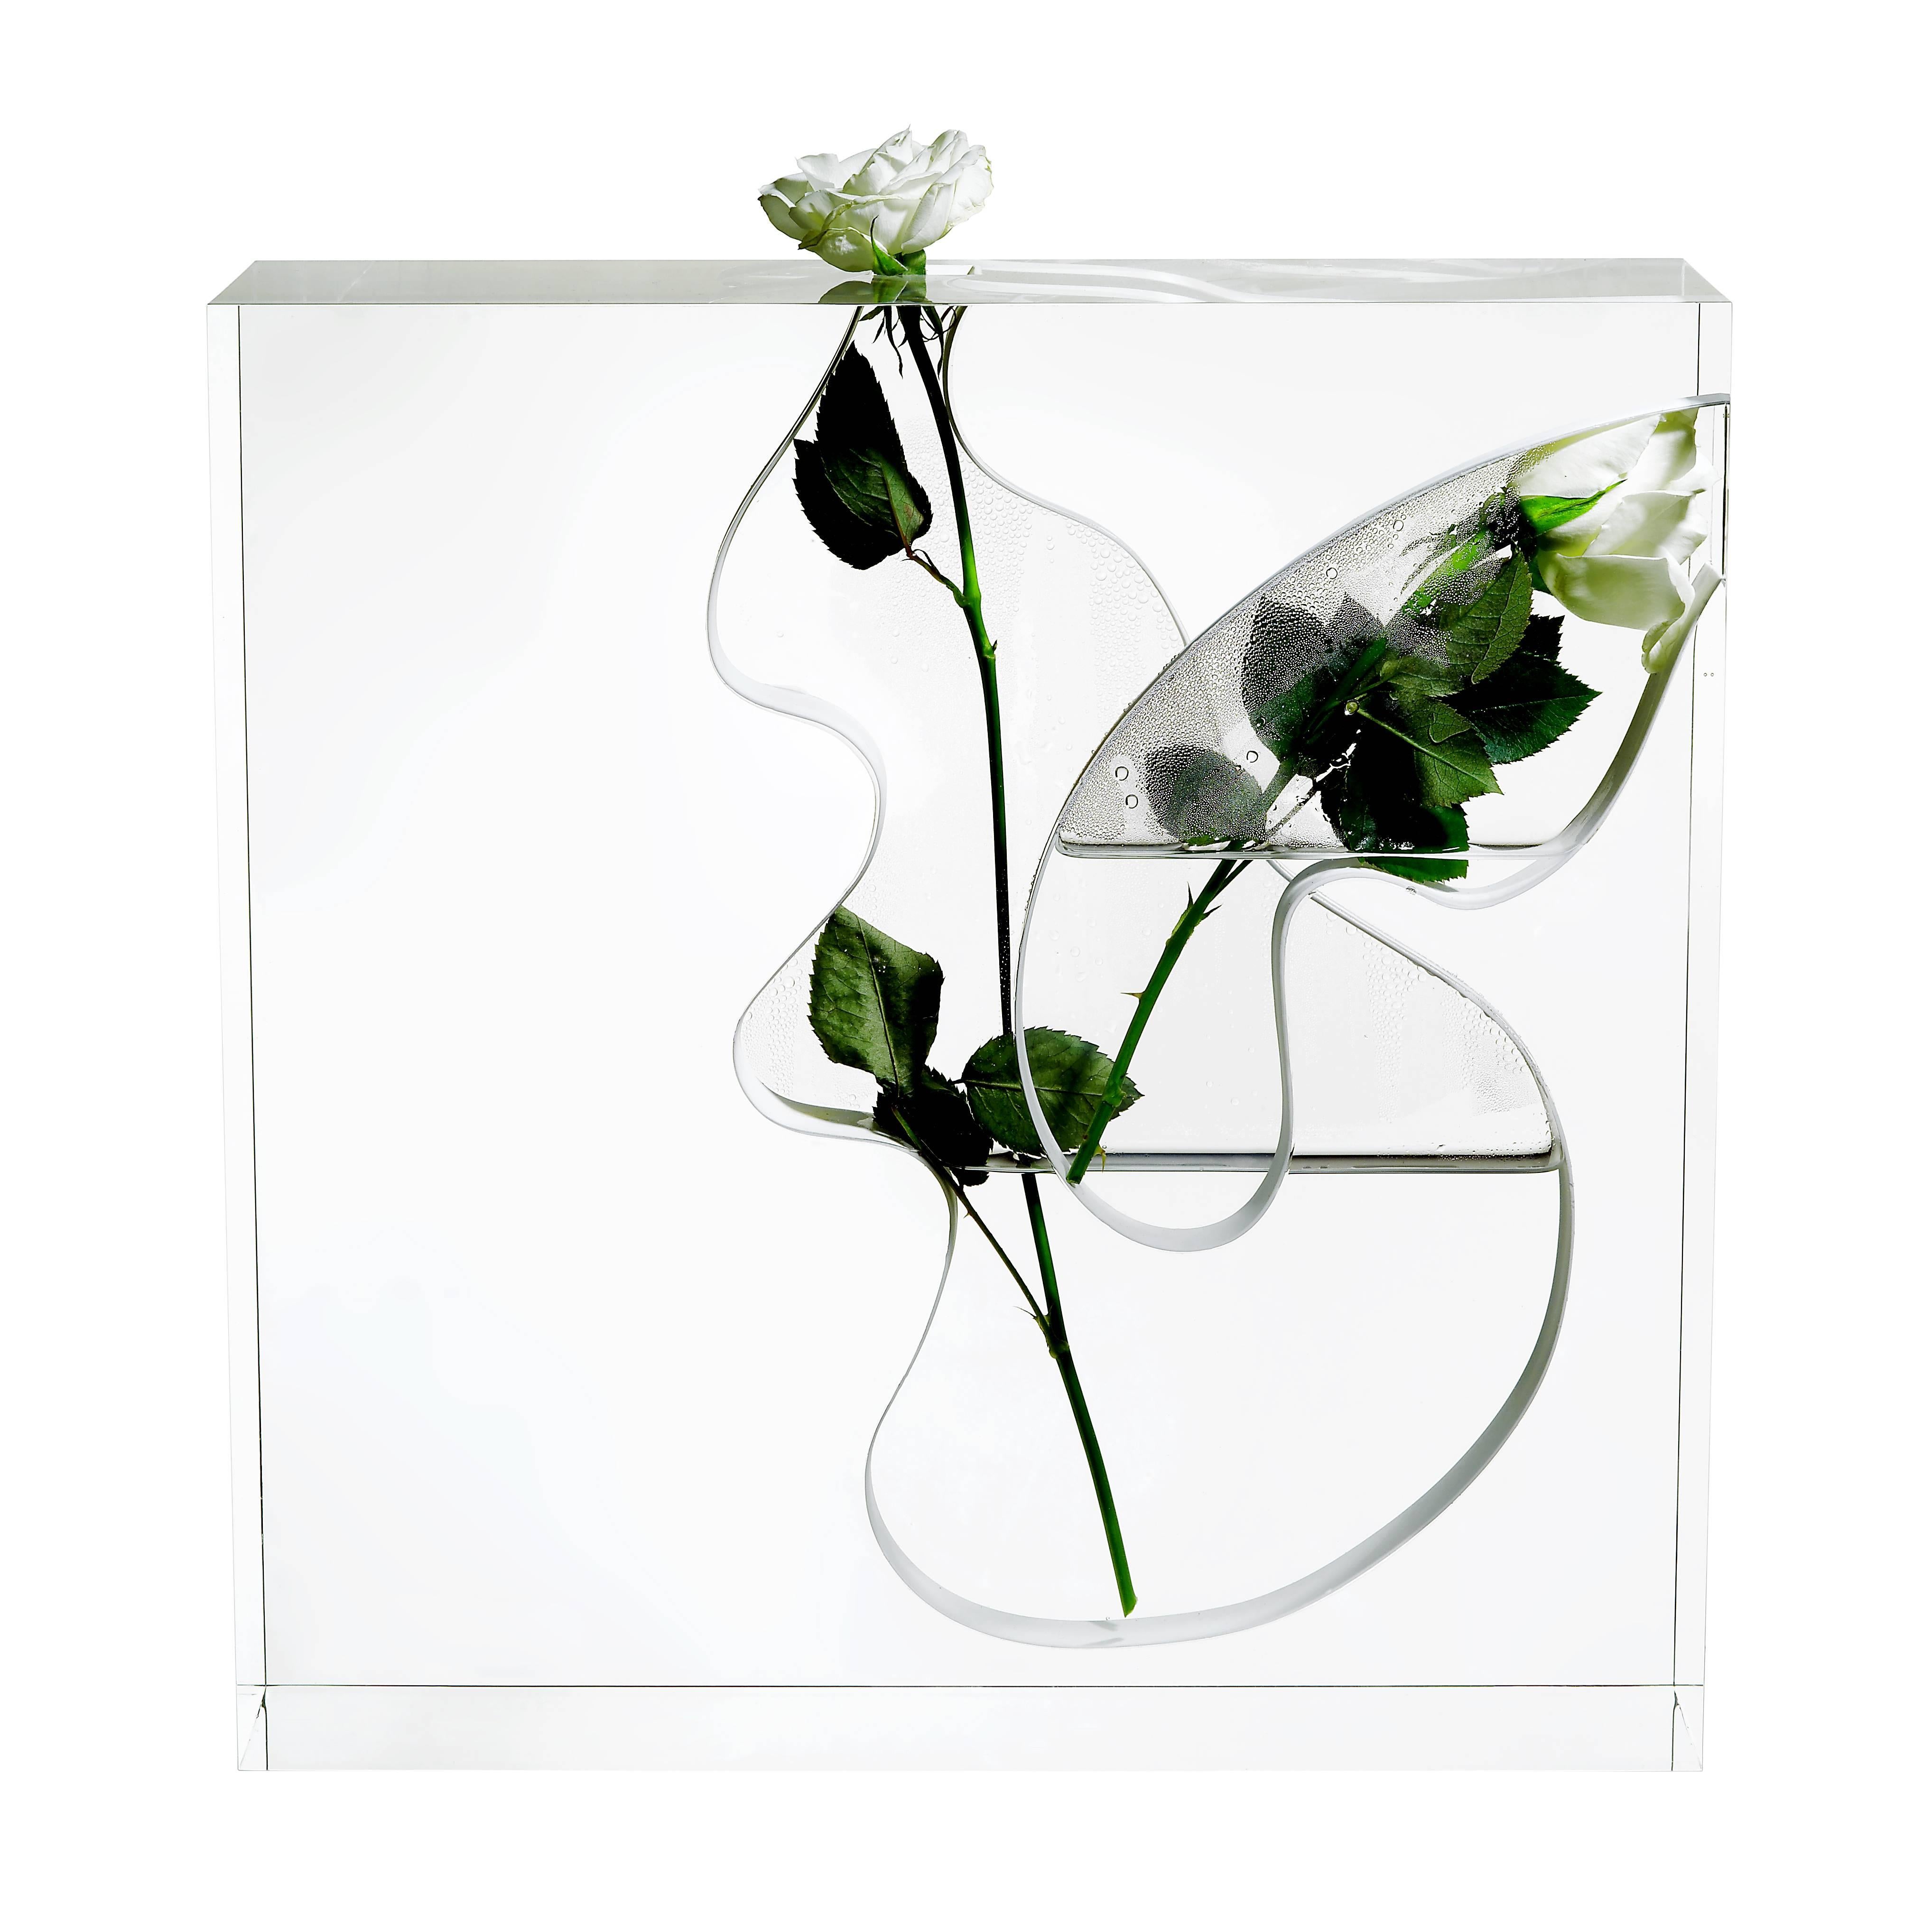 Vase clear transparent plexiglass designed by Andrea Branzi for Metea.
Limited edition 20 numbered copies. Signed and numbered. Prototype.